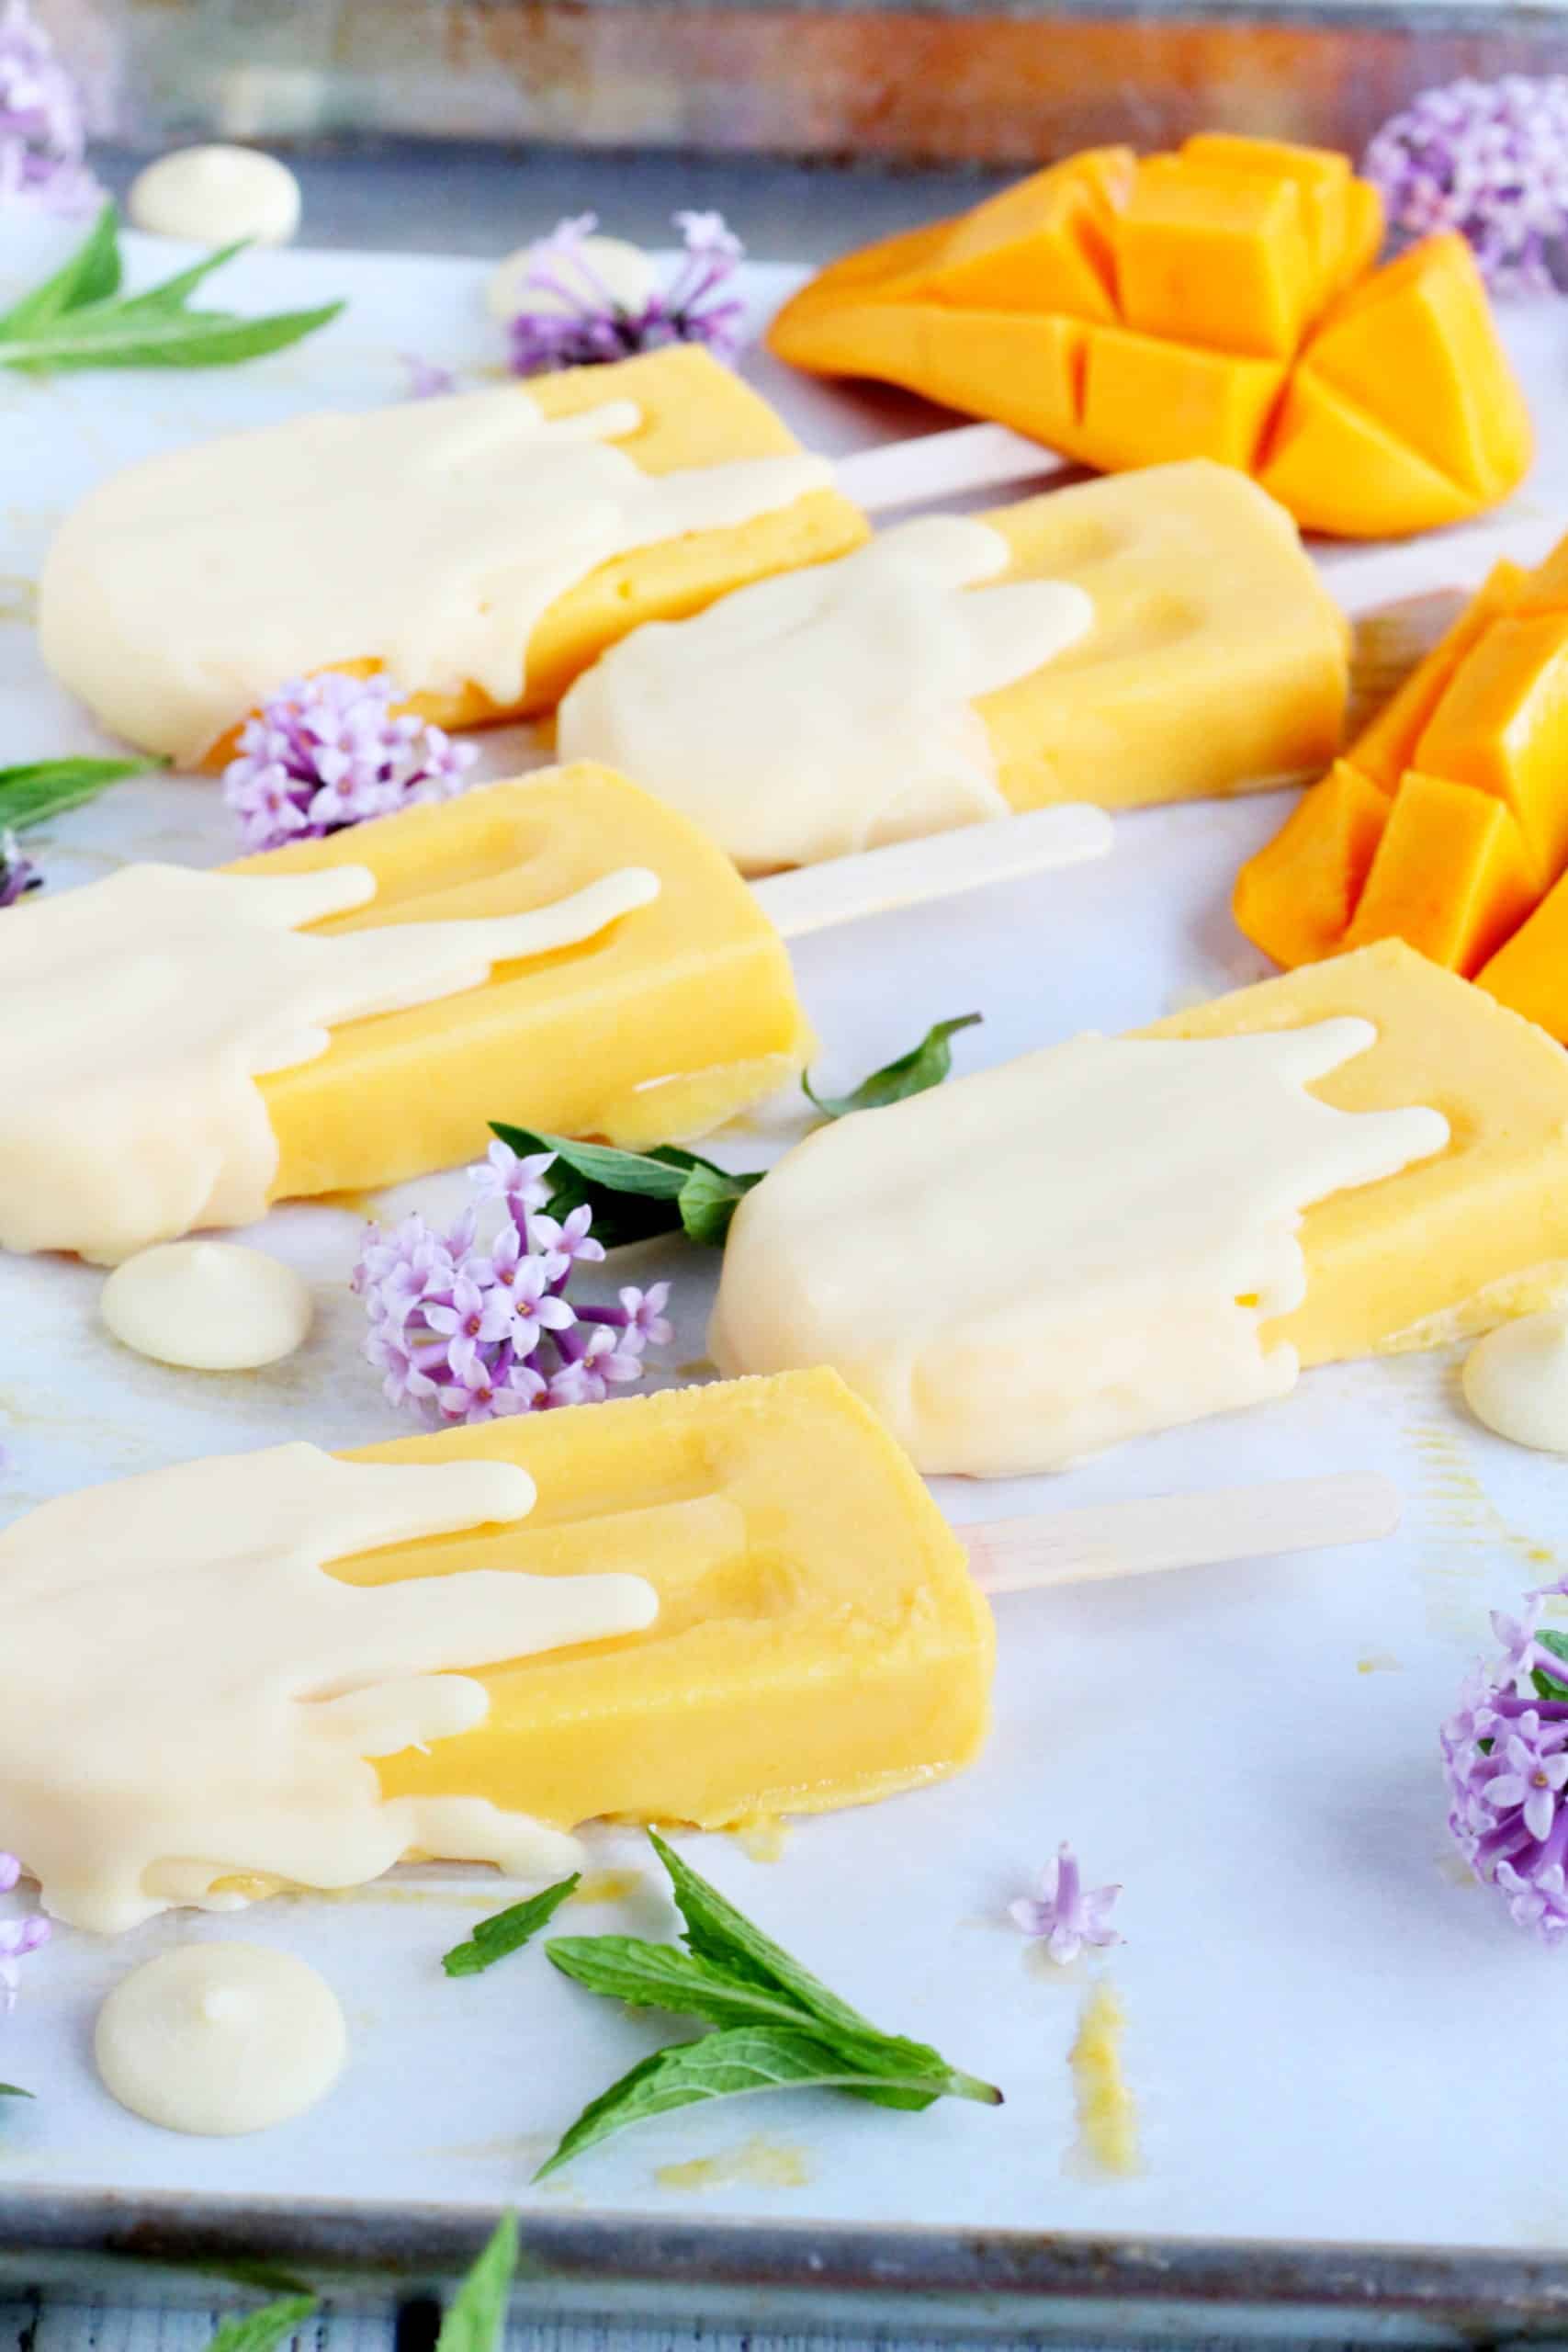 Mango pops with white chocolate cover